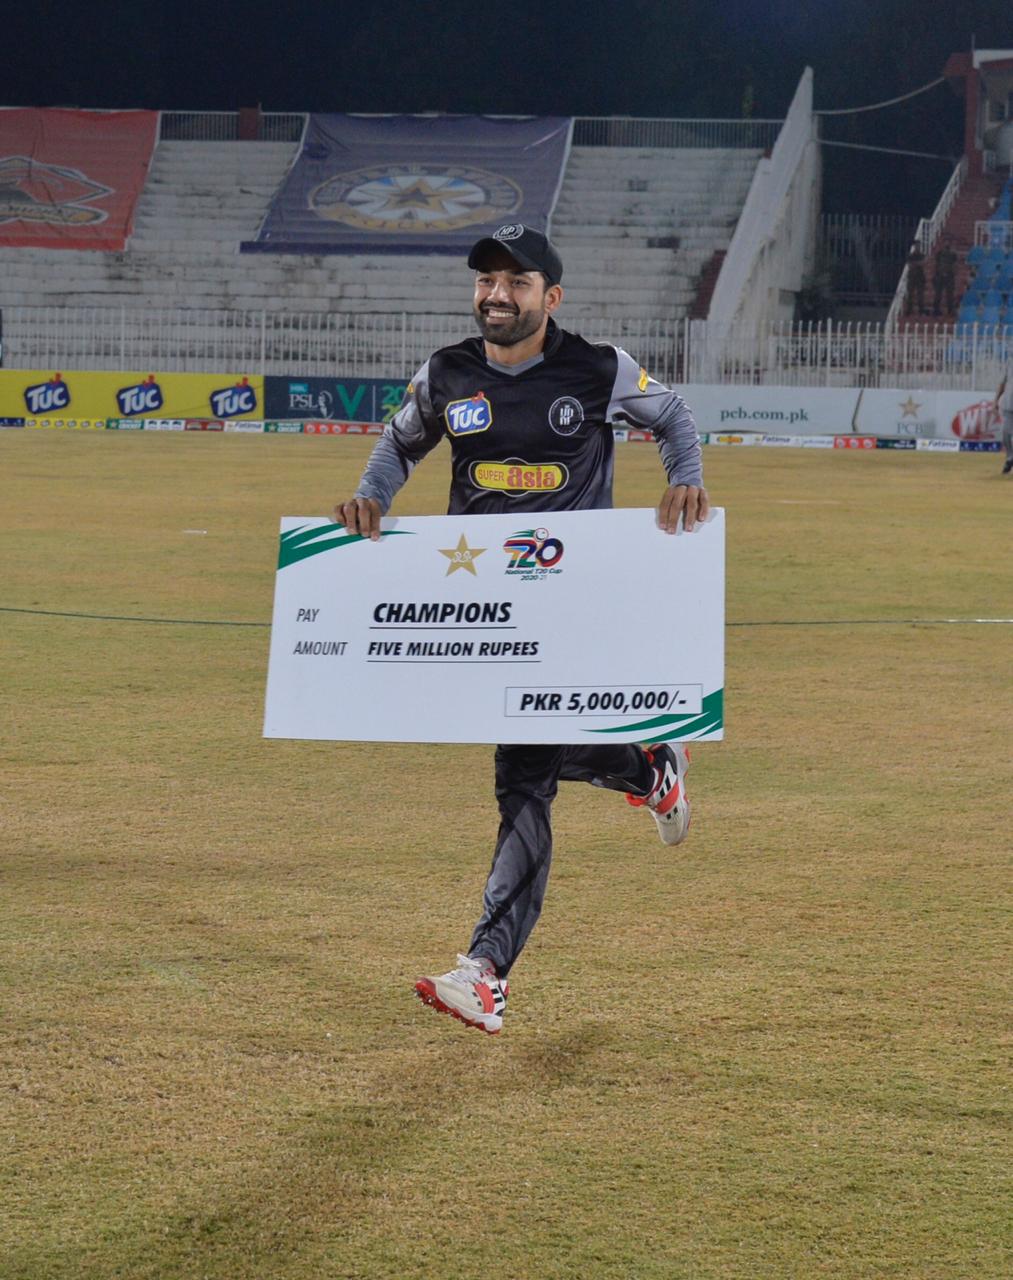 Mohammad Rizwan blooms in commanding KPK, Is this the end to Sarfaraz's international career?